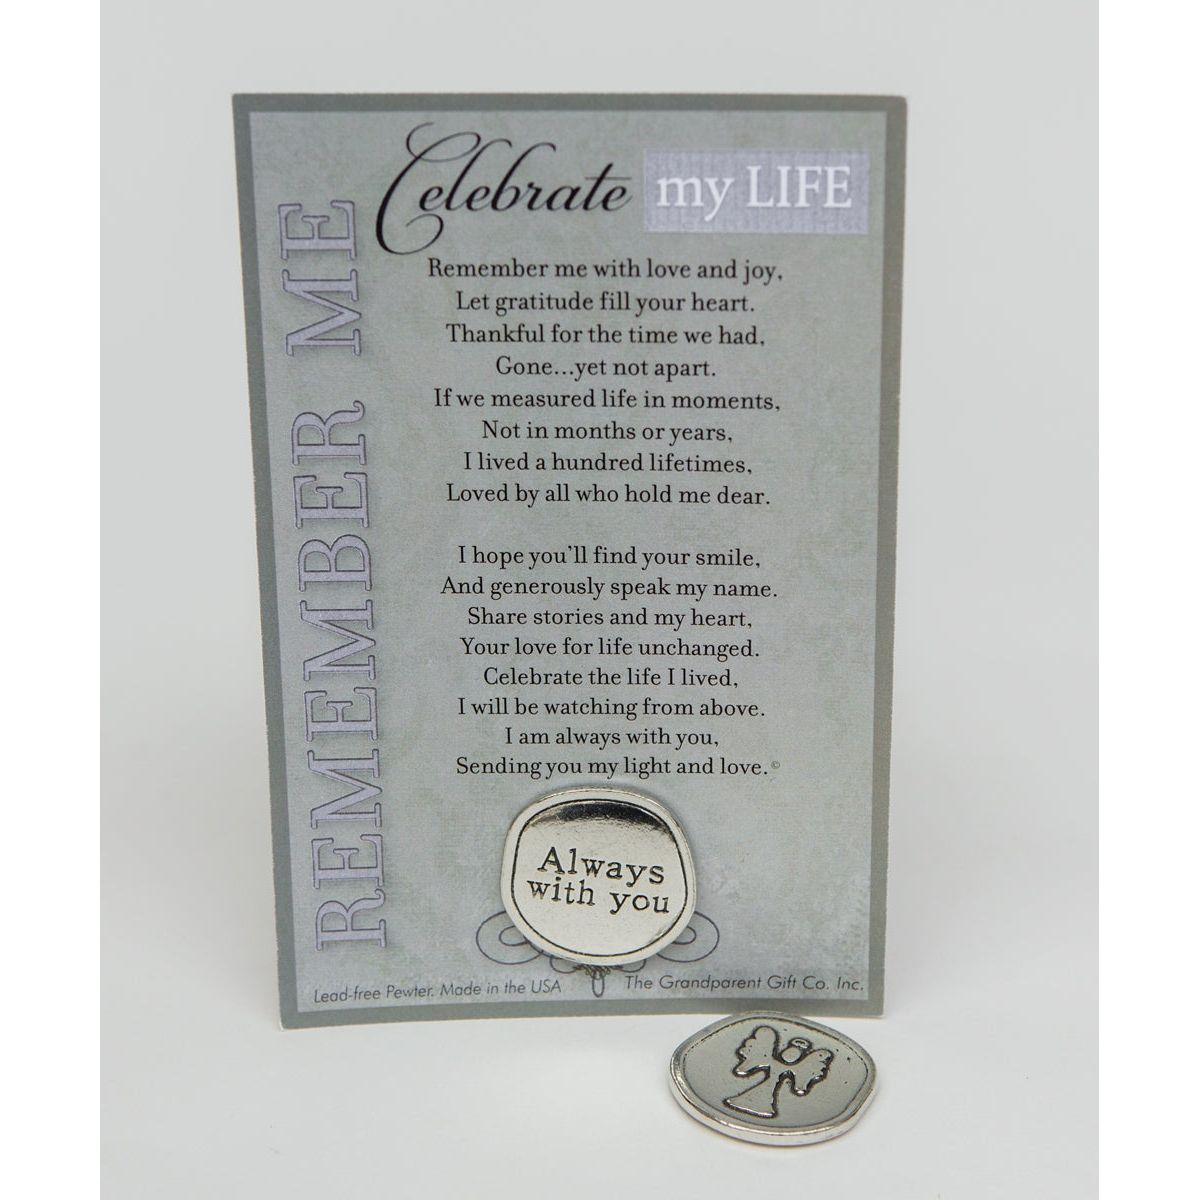 Memorial Gift: Handmade pewter coin with "Always with you" on one side and an angel on the other, packaged in a clear bag with "Celebration of Life" poem